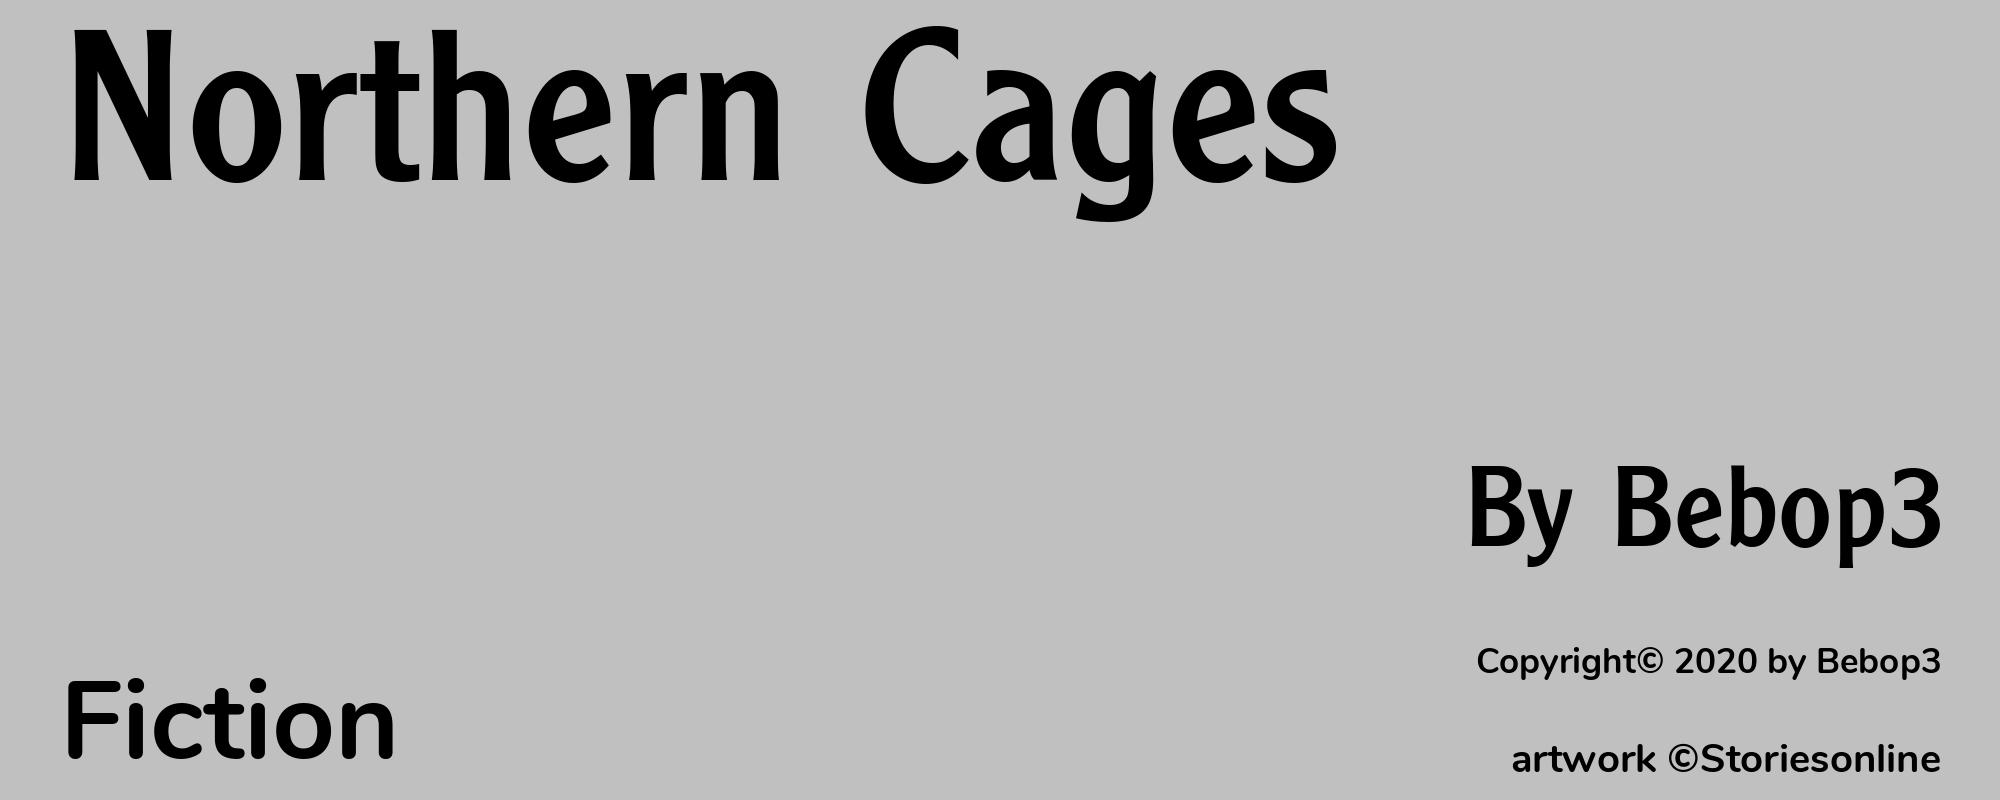 Northern Cages - Cover